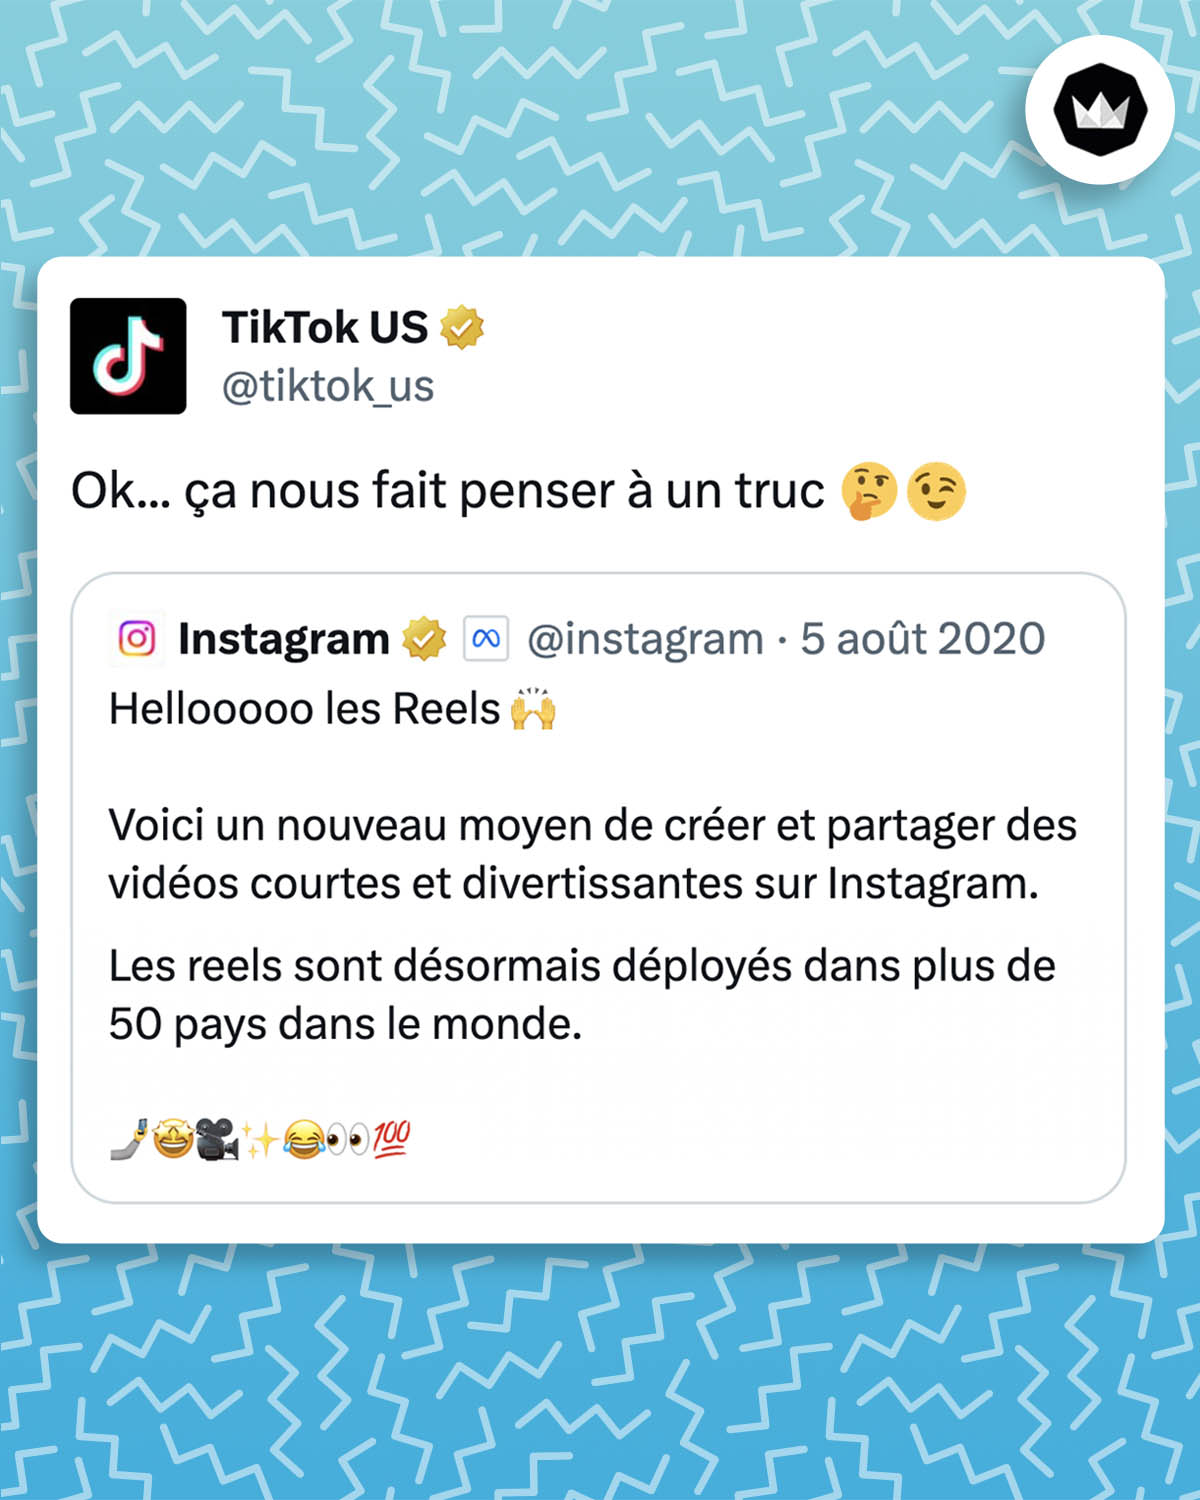 Tweet de Tiktok : well... this looks familiar 🤔😉 La marque répond à un tweet d'Instagram : Hellooooo, Reels Introducing a new way to create and discover short, entertaining videos on Instagram. Reels is rolling out today to more than 50 countries around the world. 